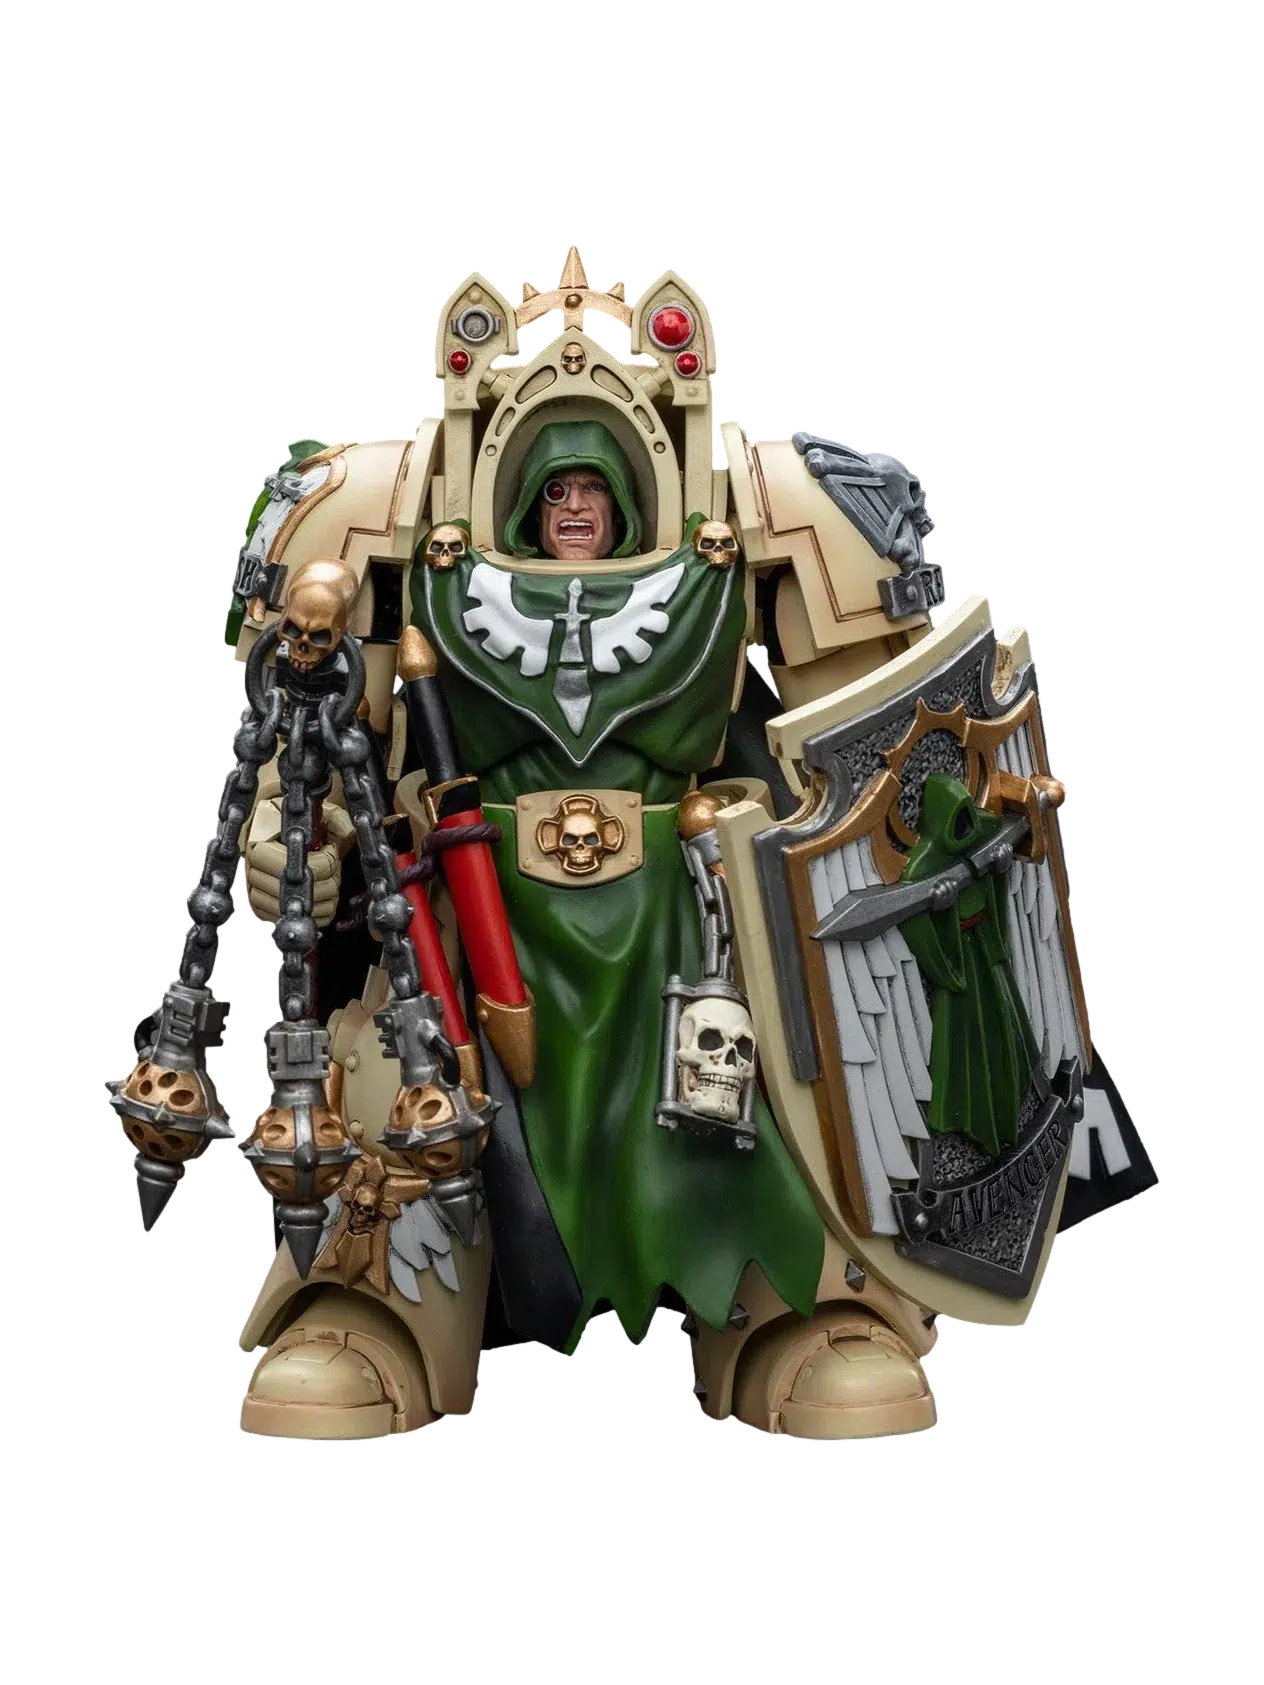 Warhammer 40K: Dark Angels: Deathwing Knight Master with Flail of the Unforgiven: Joy Toy: Joy Toy